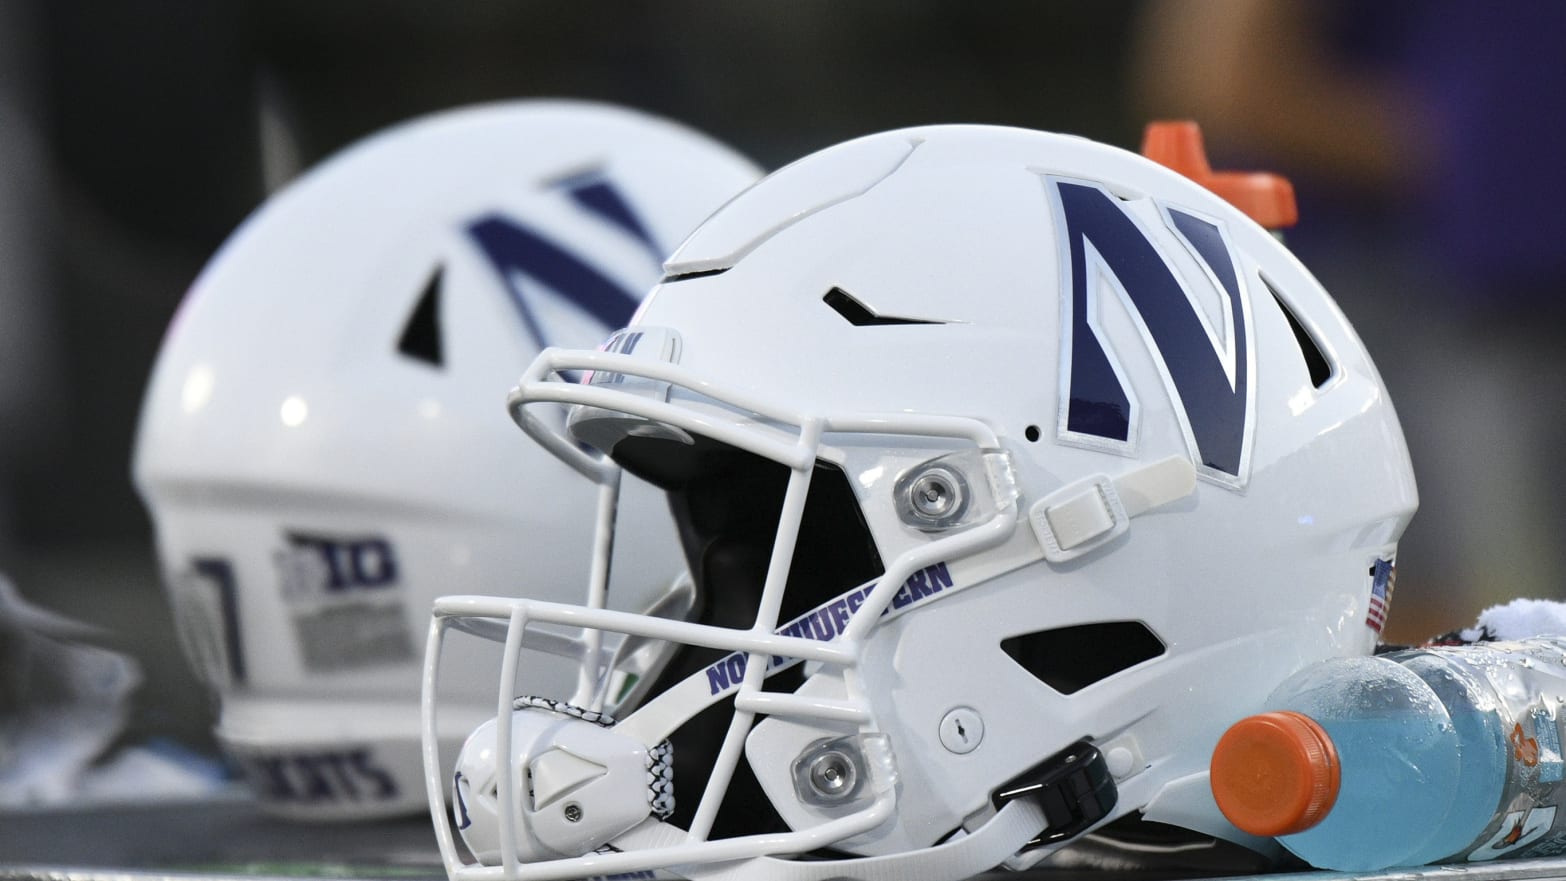 A football helmet for the Northwestern University wildcats. The football program has been accused of turning a blind eye to sexual hazing of players.